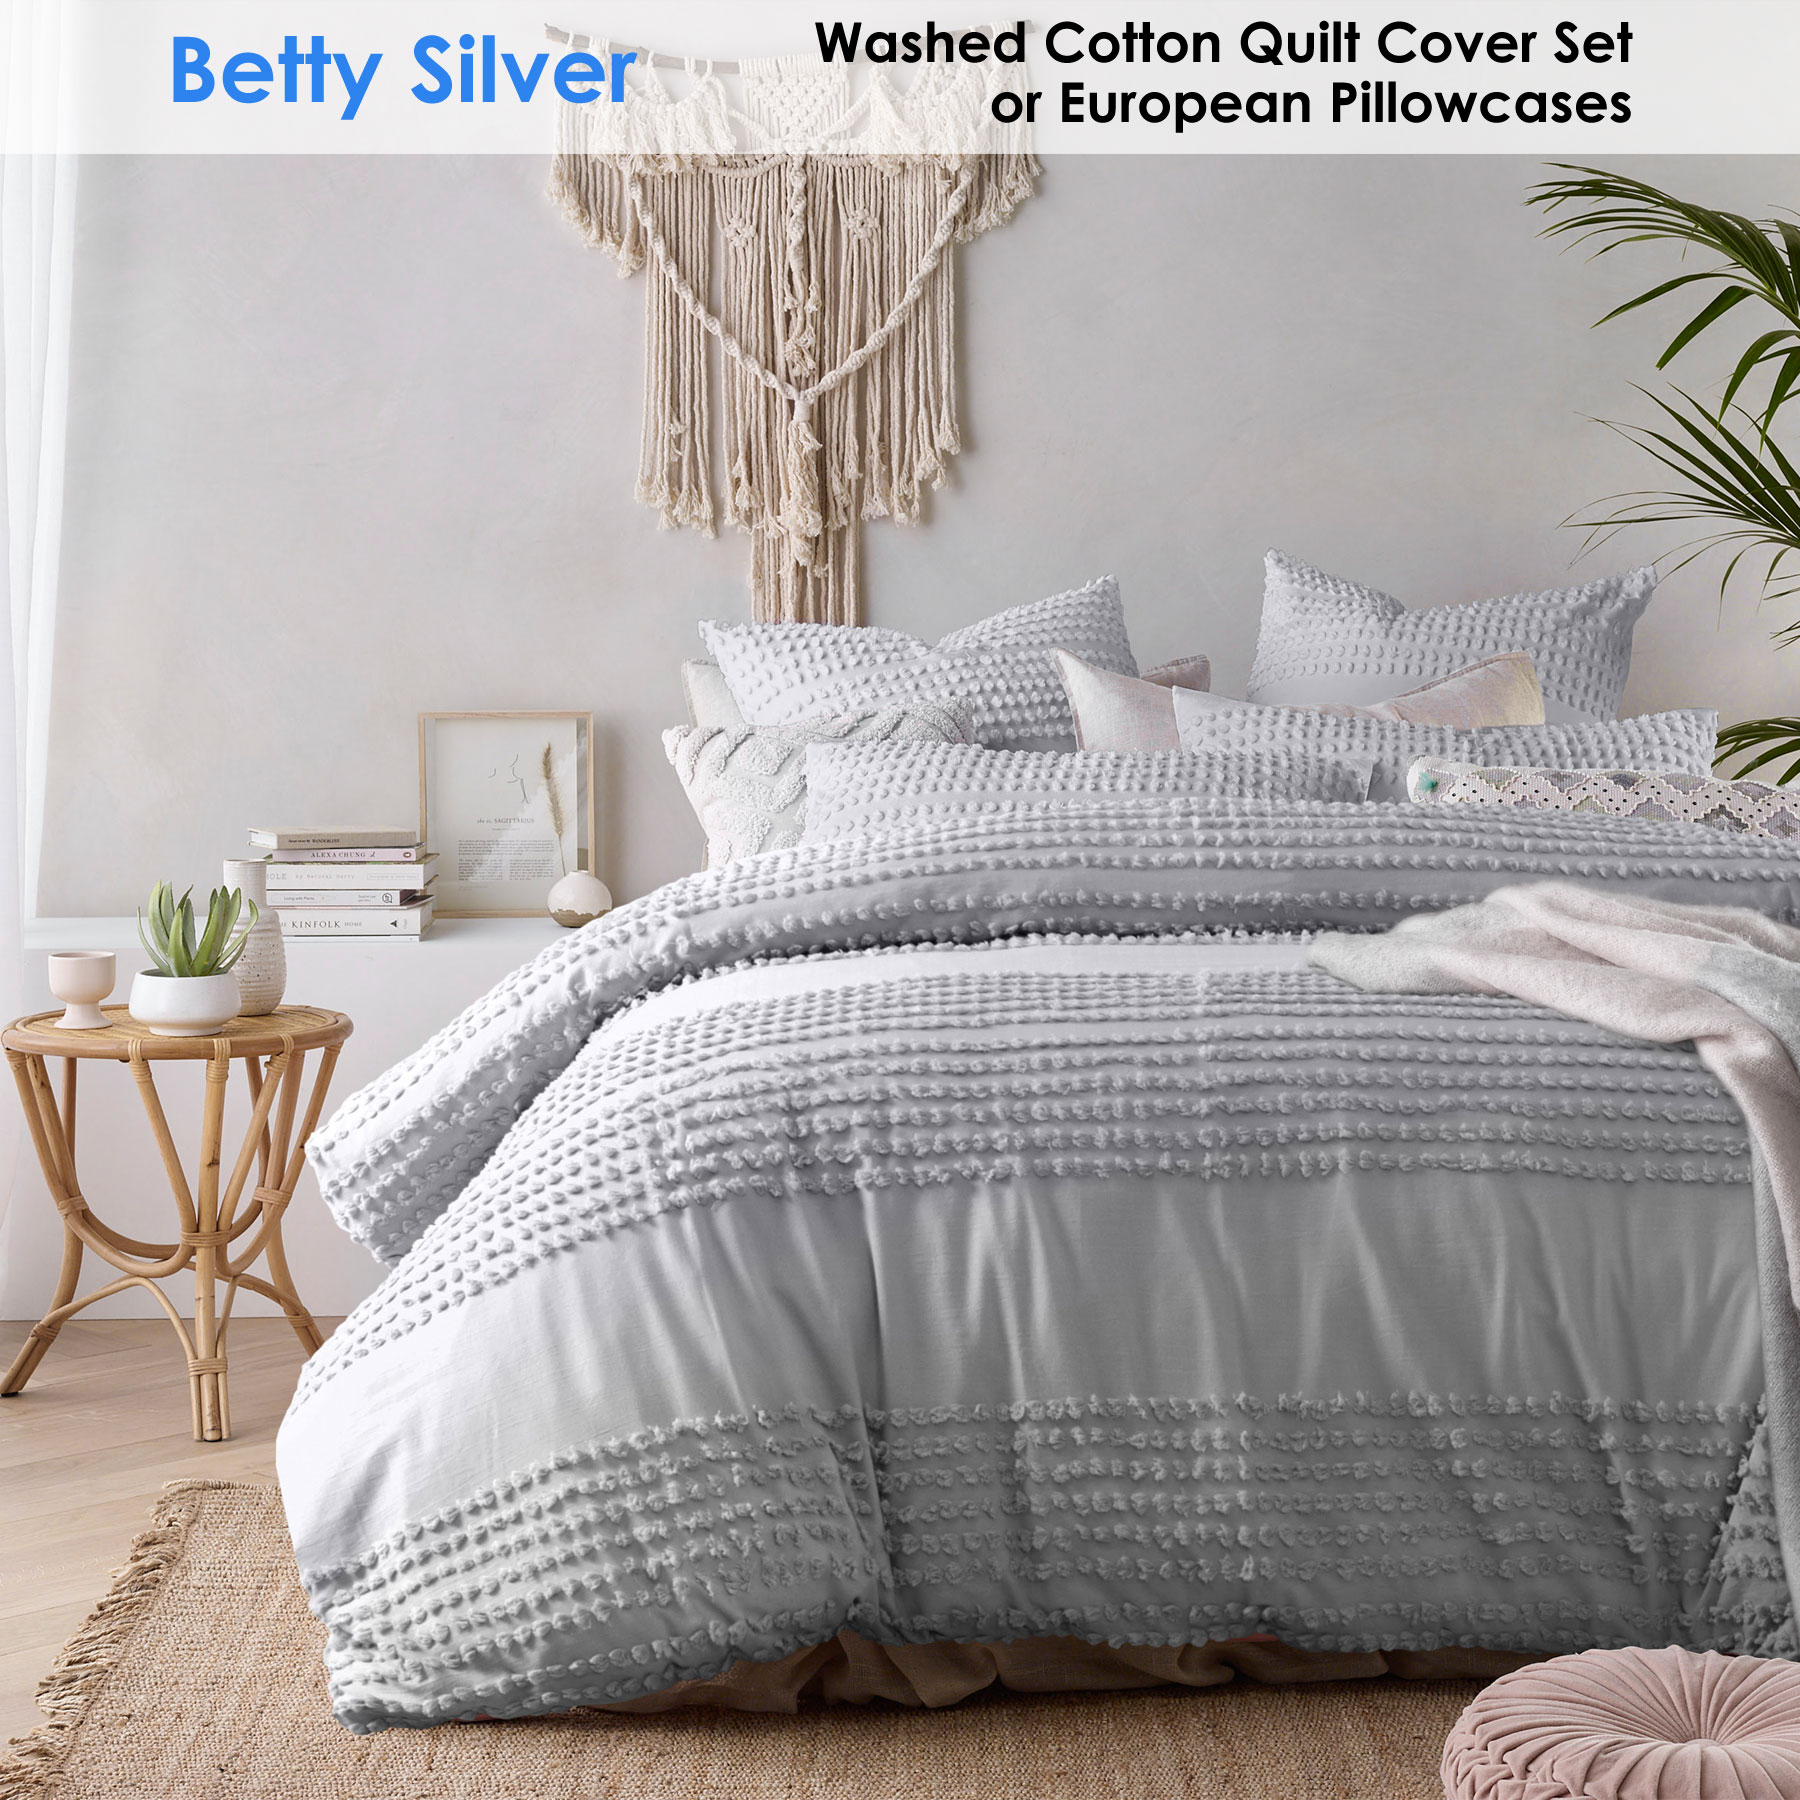 Betty Silver Washed Cotton Quilt Cover Set or European Pillowcases by Vintage Homewares Designs